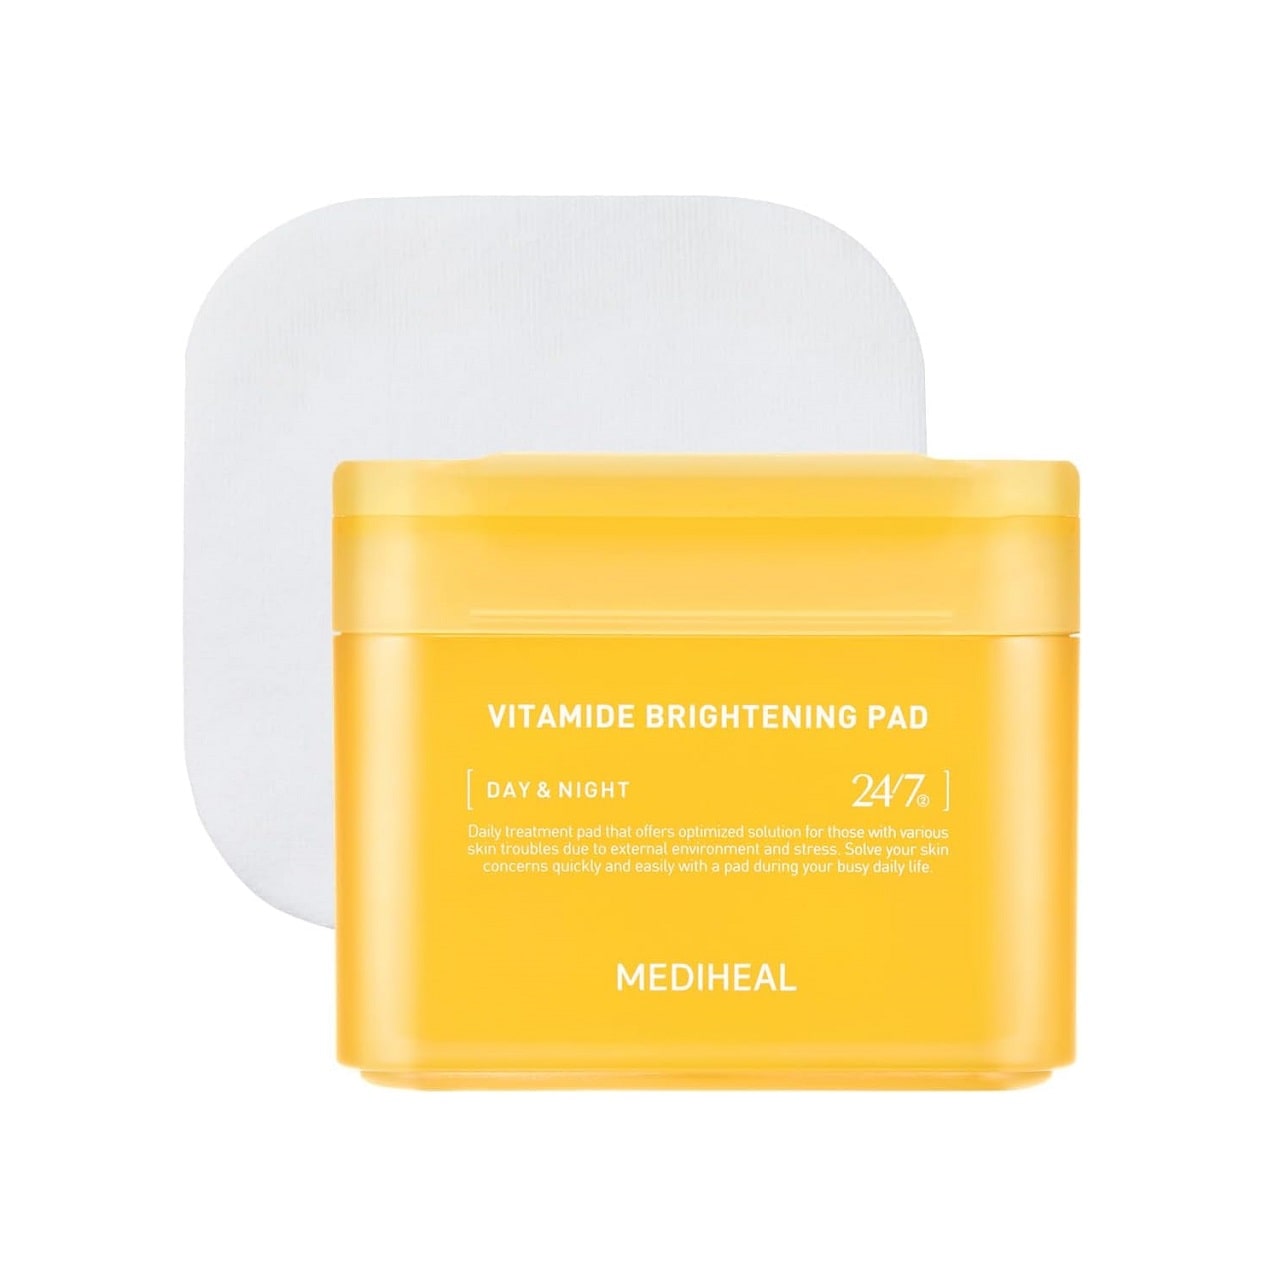 Product label for Mediheal Vitamide Brightening Pads (100 count)